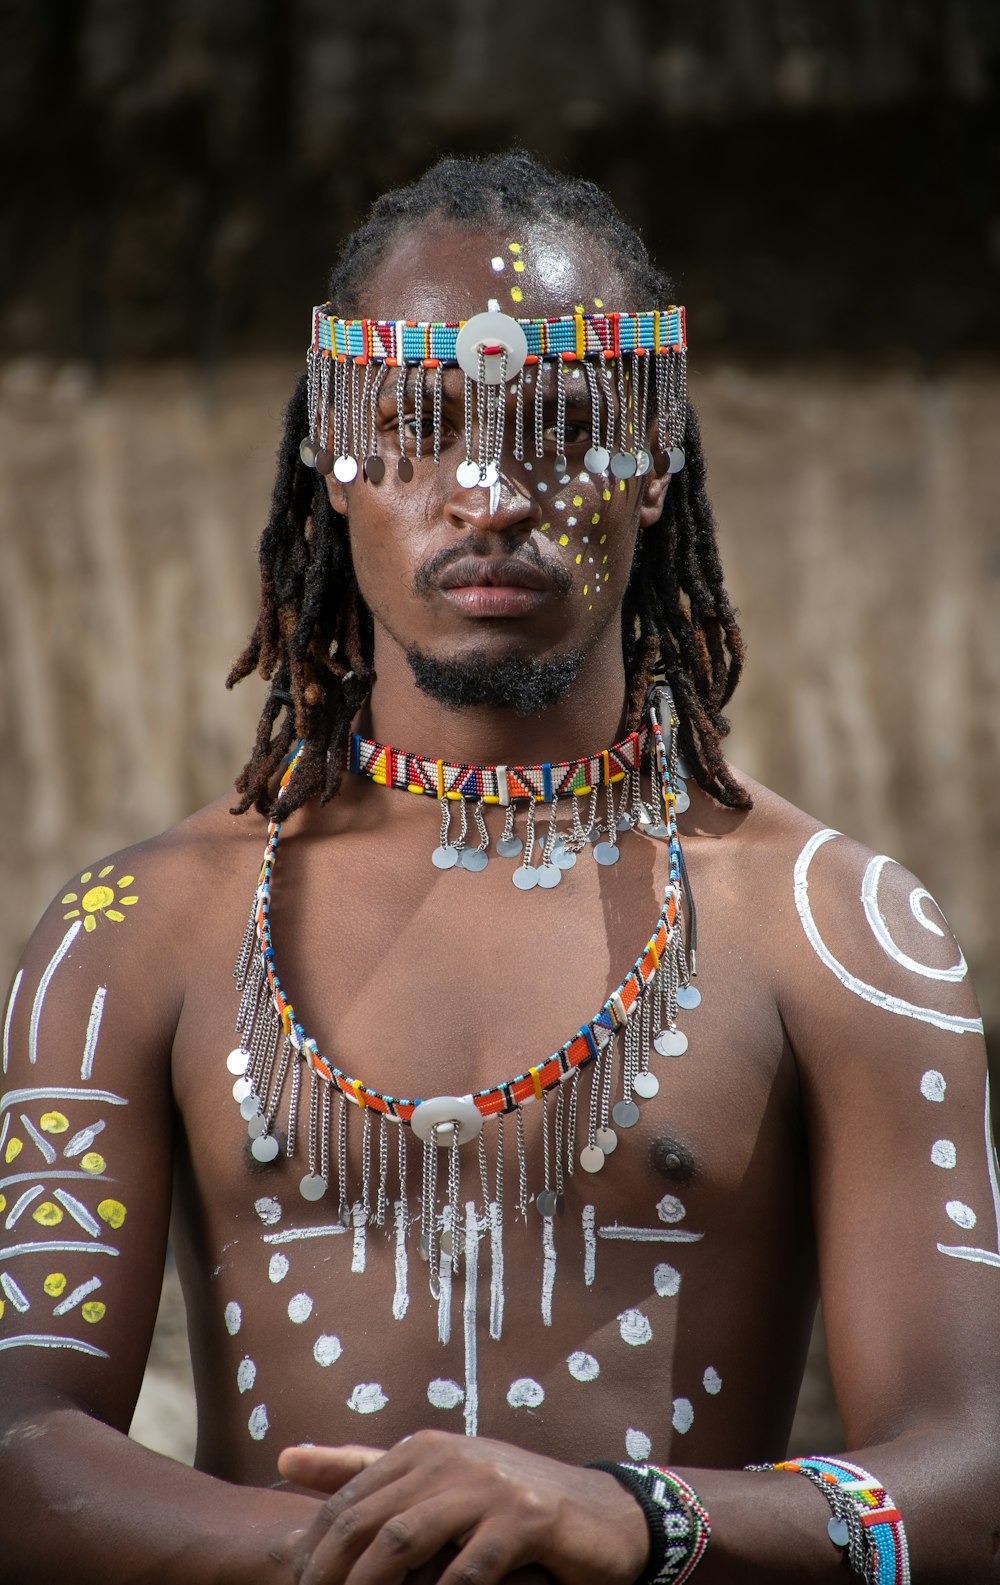 a man wearing a beaded headdress and beads